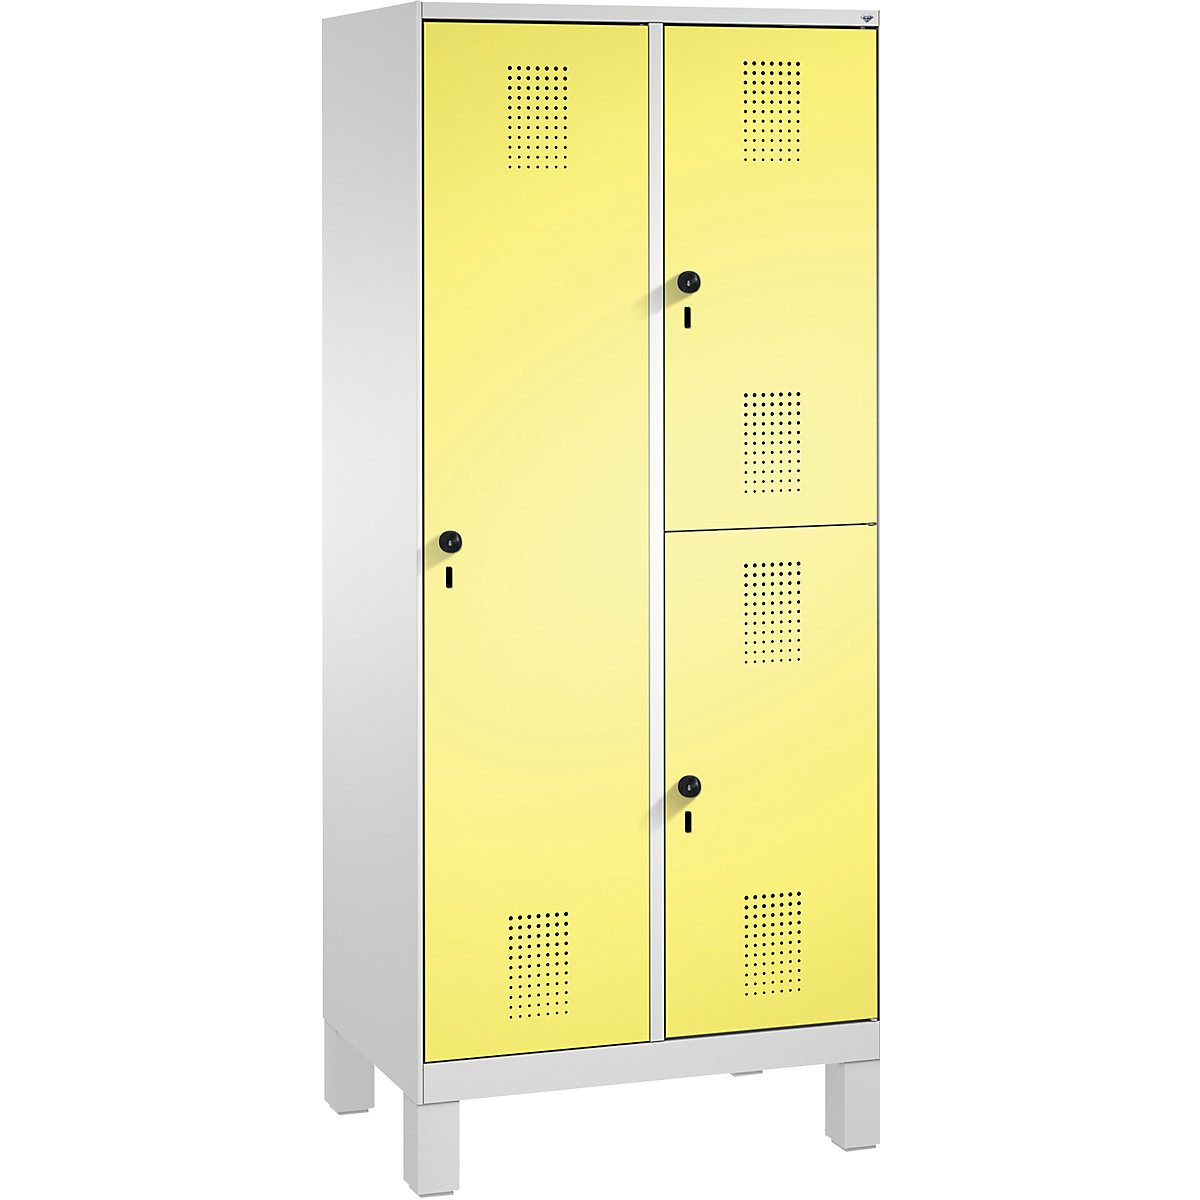 EVOLO combination cupboard, single and double tier – C+P, 2 compartments, 3 doors, compartment width 400 mm, with feet, light grey / sulphur yellow